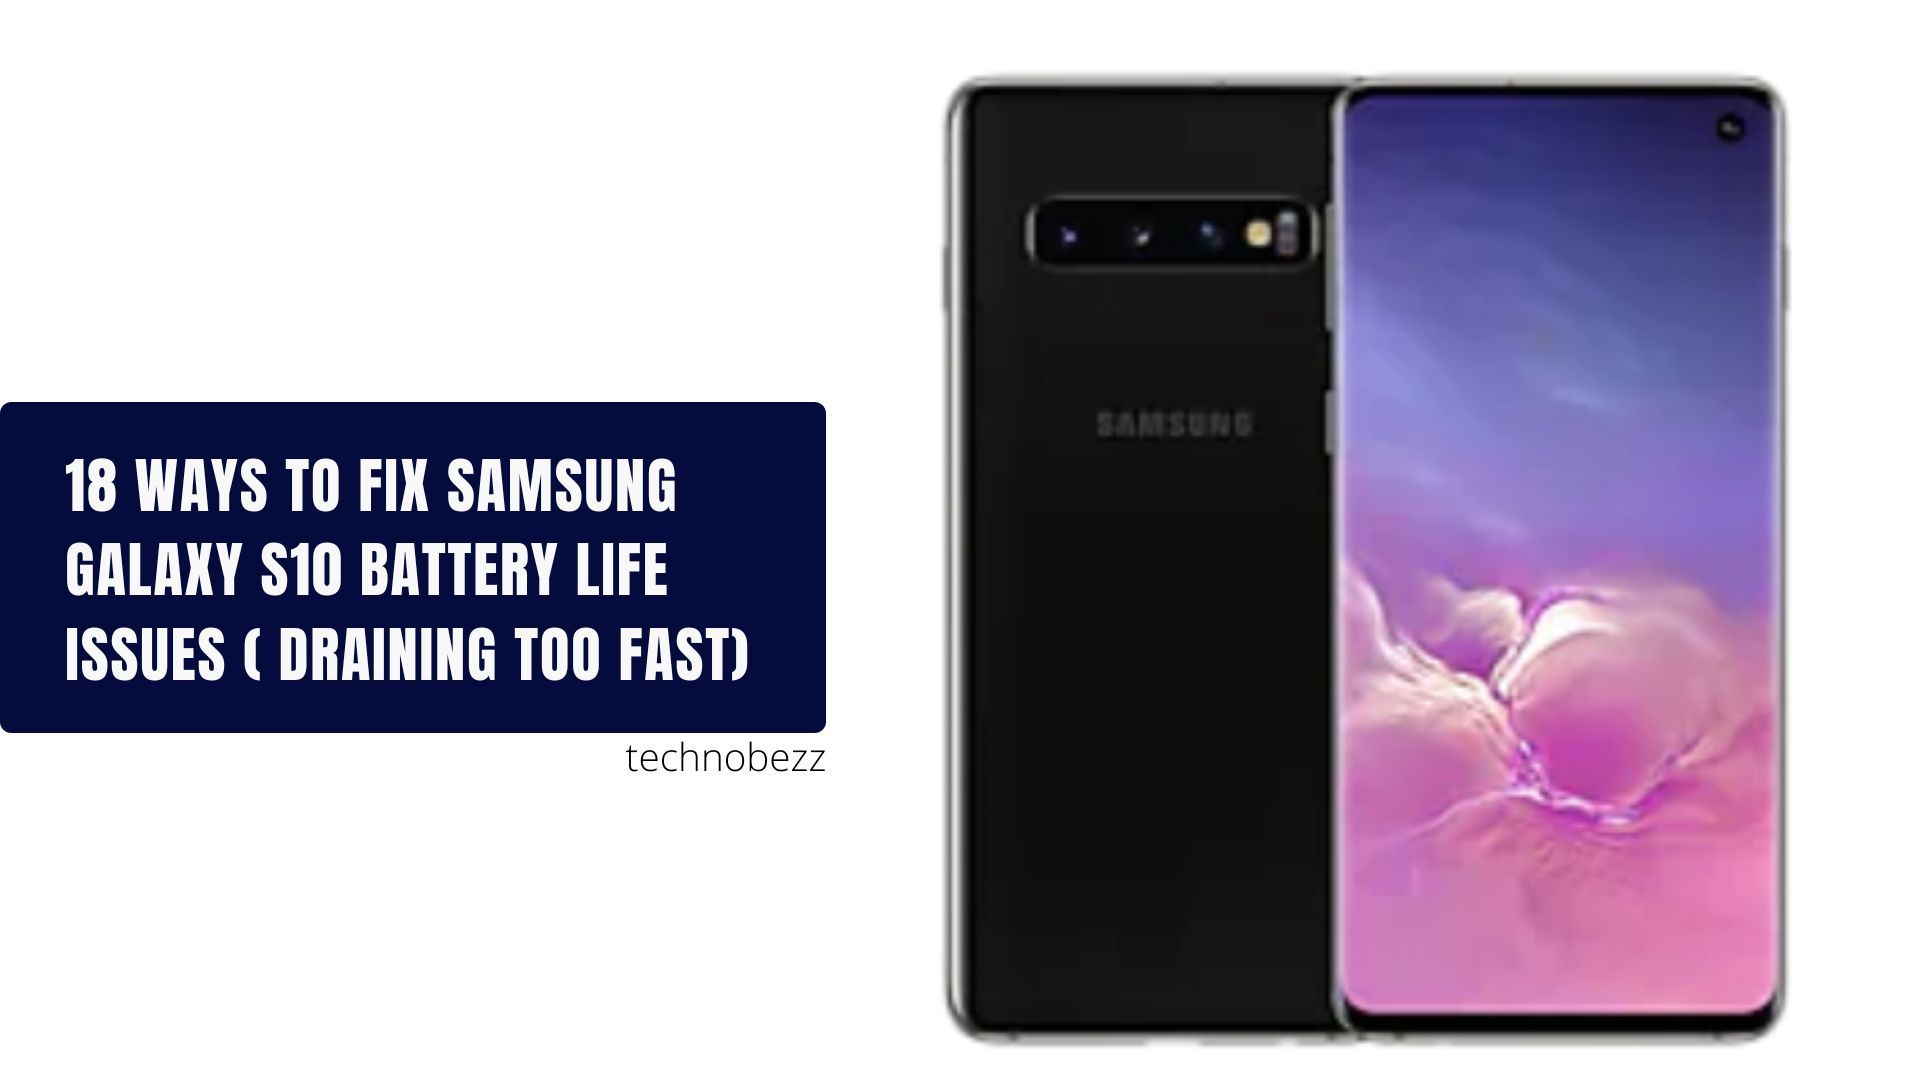 18 Ways To Fix Samsung Galaxy S10 Battery Life Issues ( Too